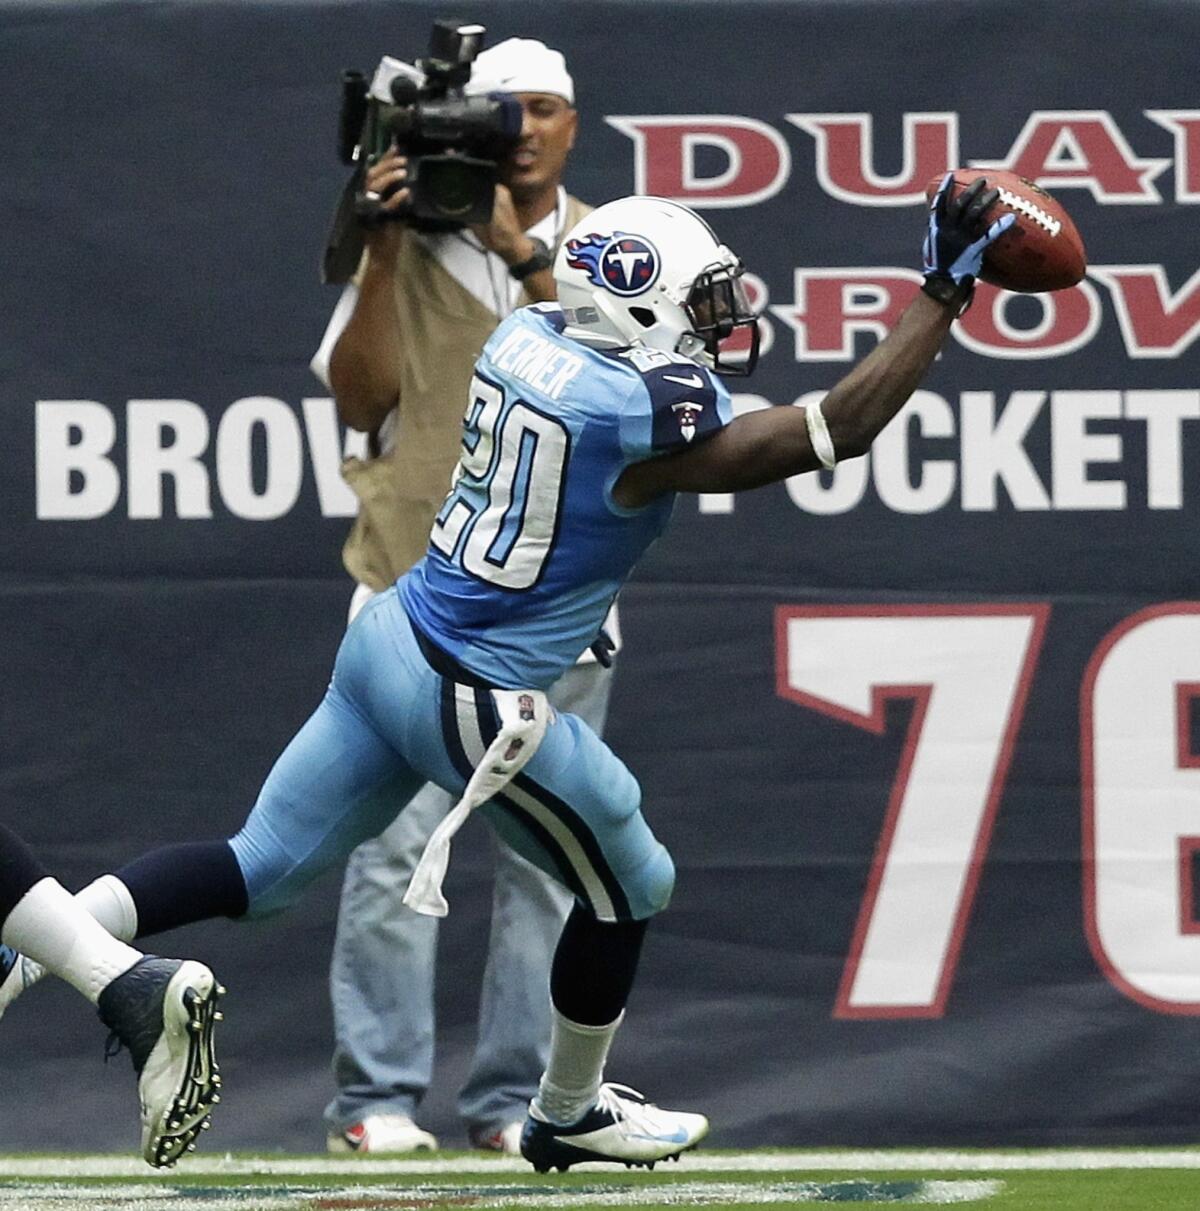 Tennessee cornerback Alterraun Verner celebrates after scoring on an interception return against the Houston Texans last month. Verner has been a problem solver for the Titans' defense.